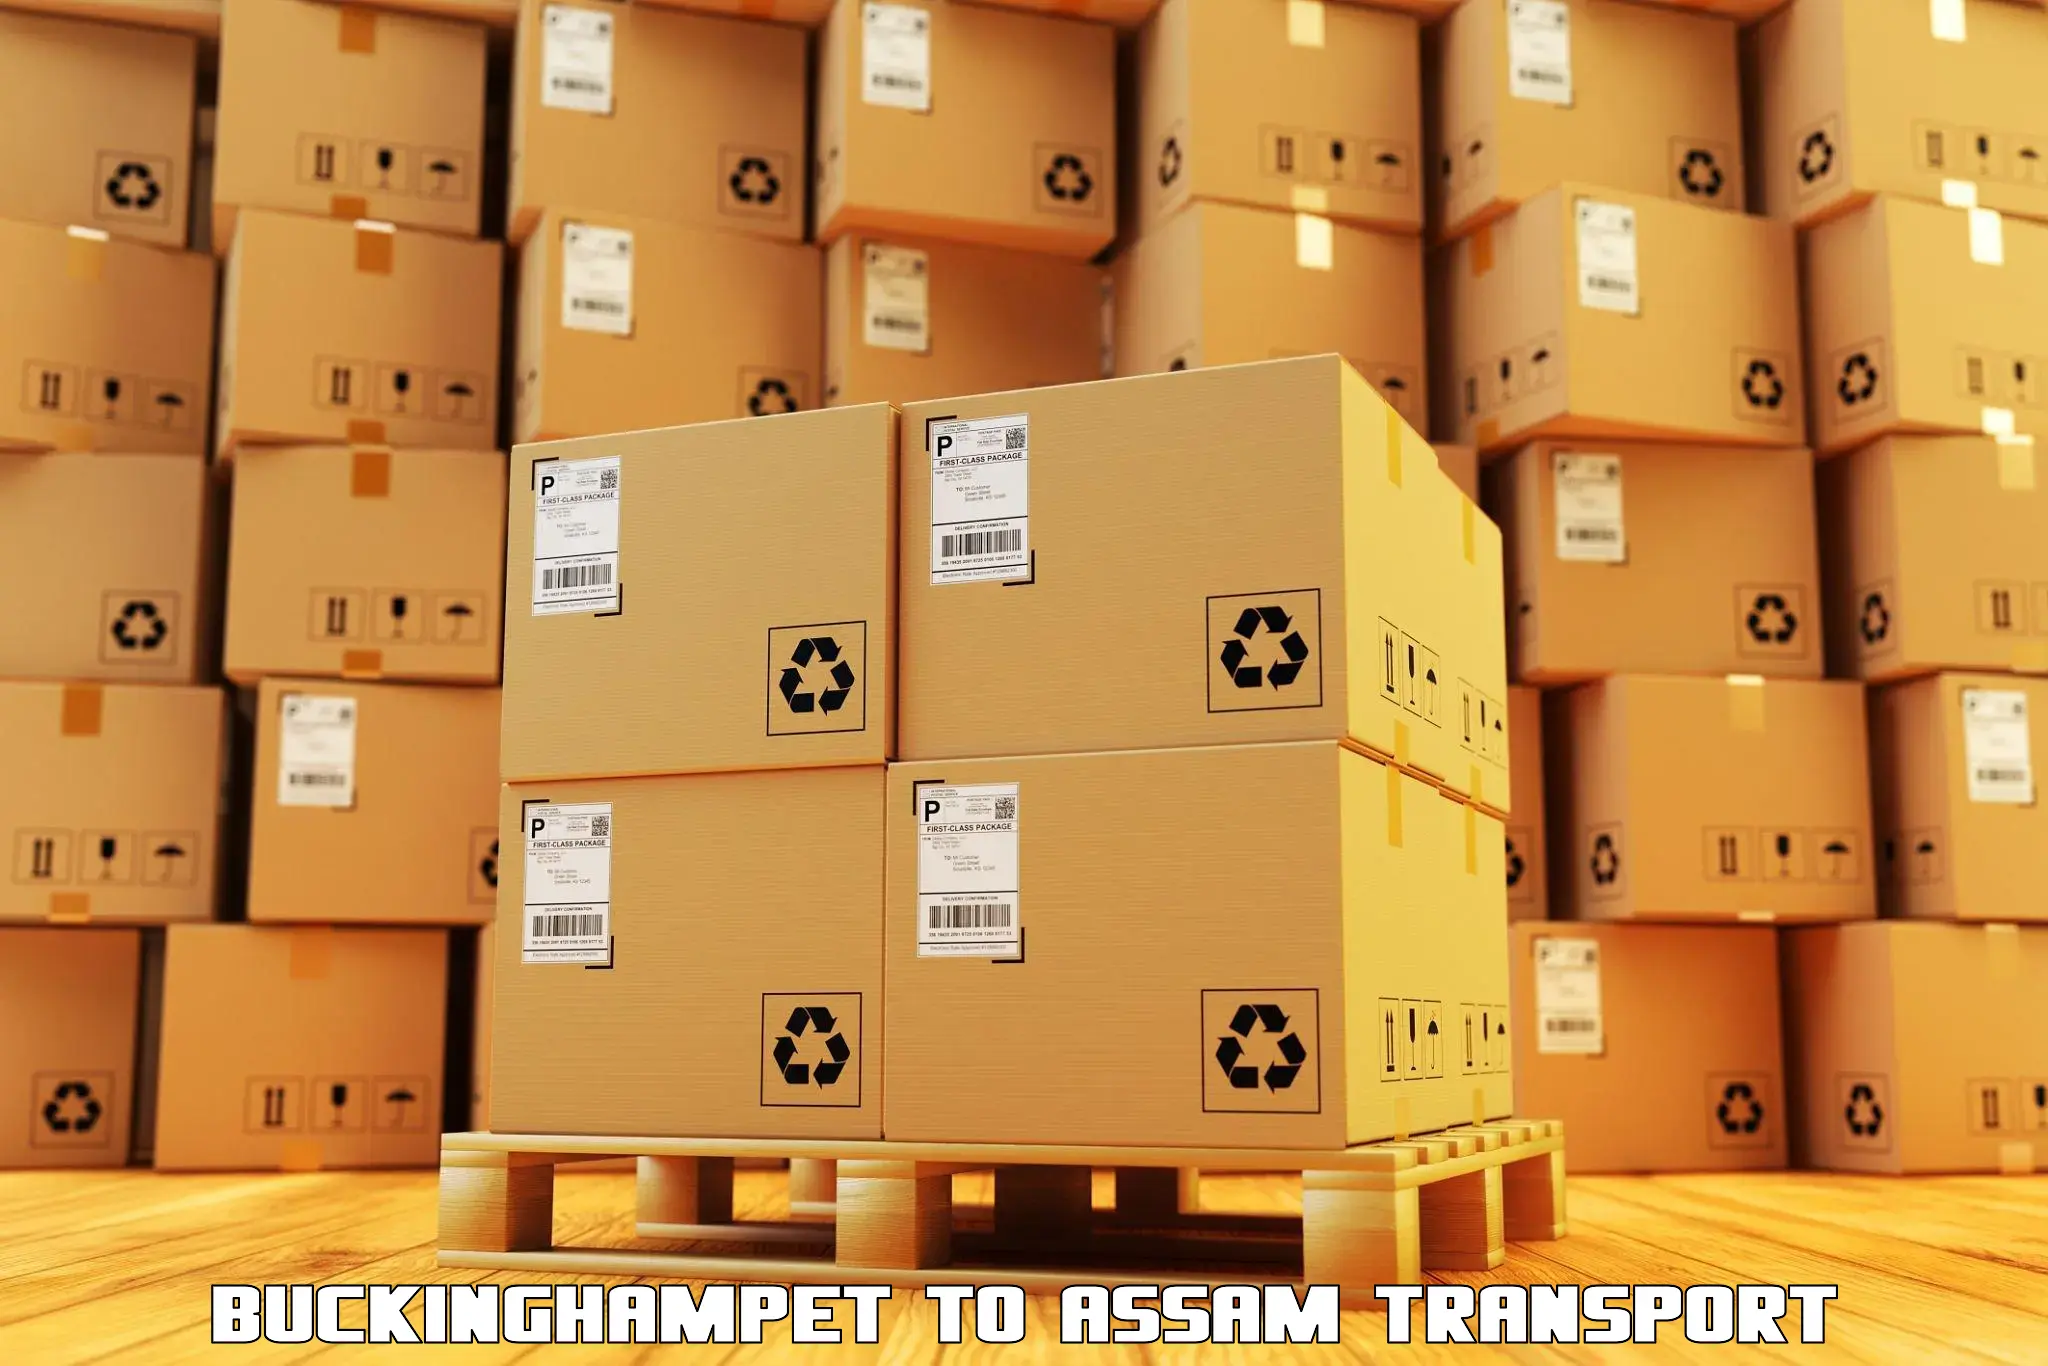 Best transport services in India Buckinghampet to Doom Dooma